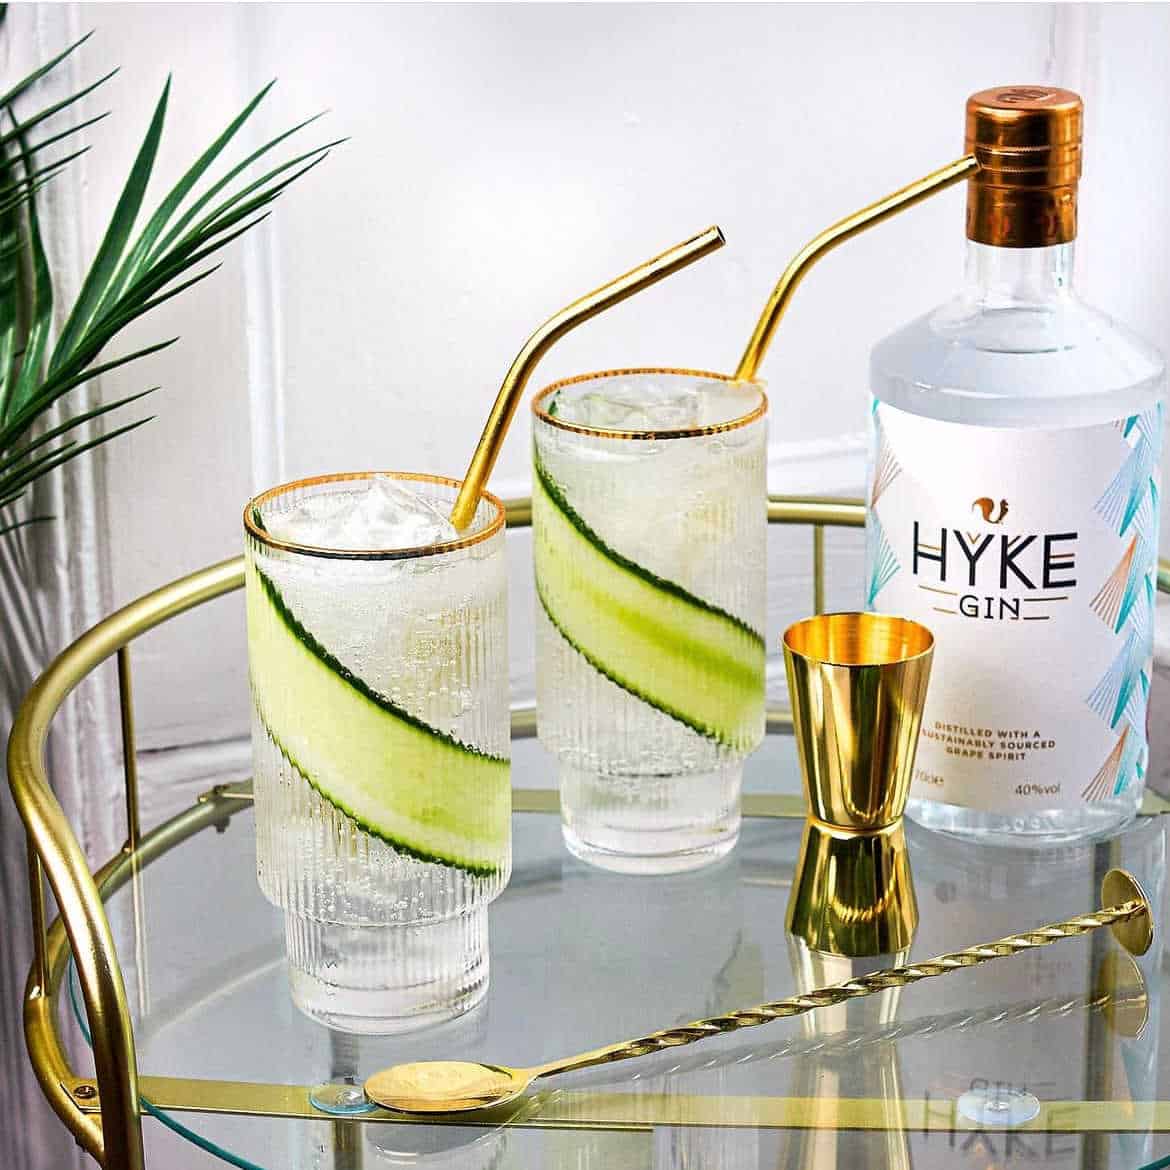 Bottle of Hyke gin next to two tall glasses of gin with cucumber in them.